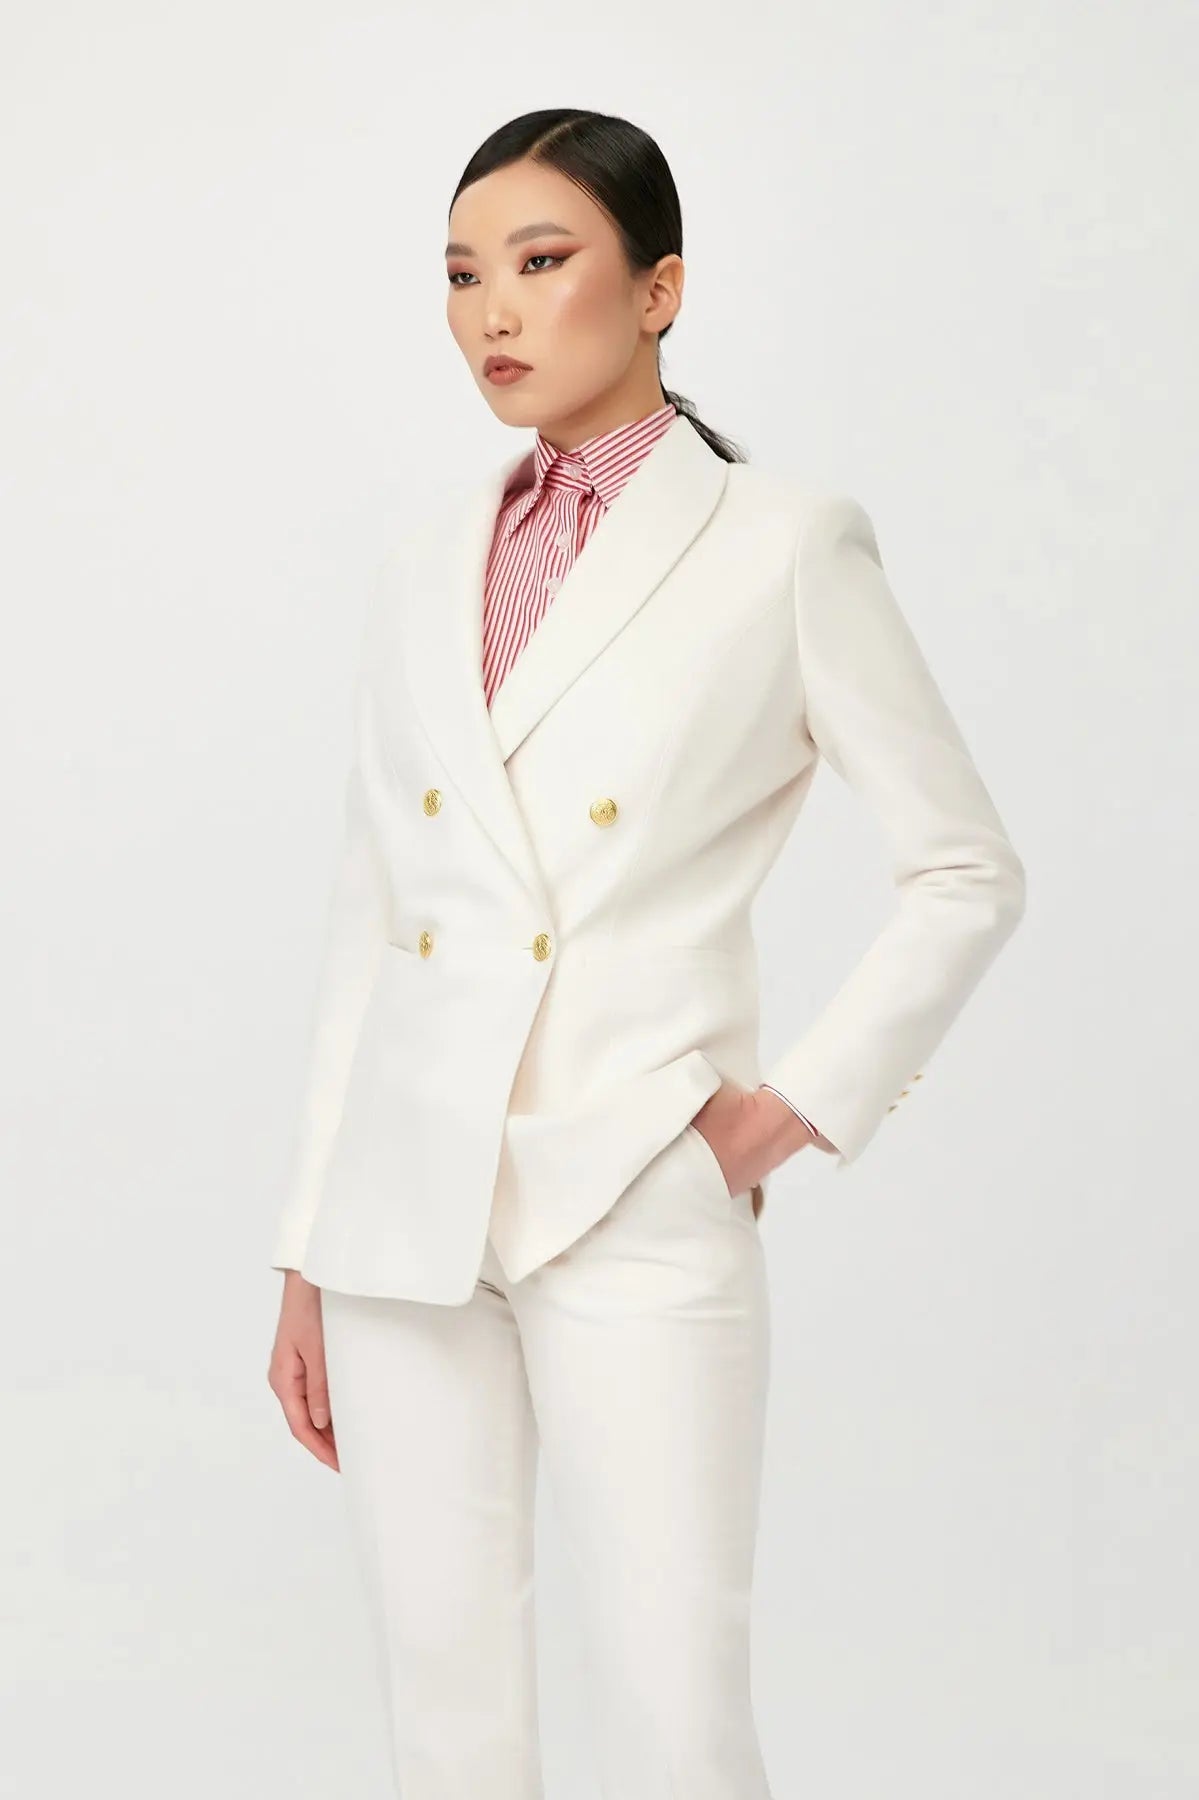 Opal Double Breasted Suit with Gold Buttons - Alexandra-Dobre.com